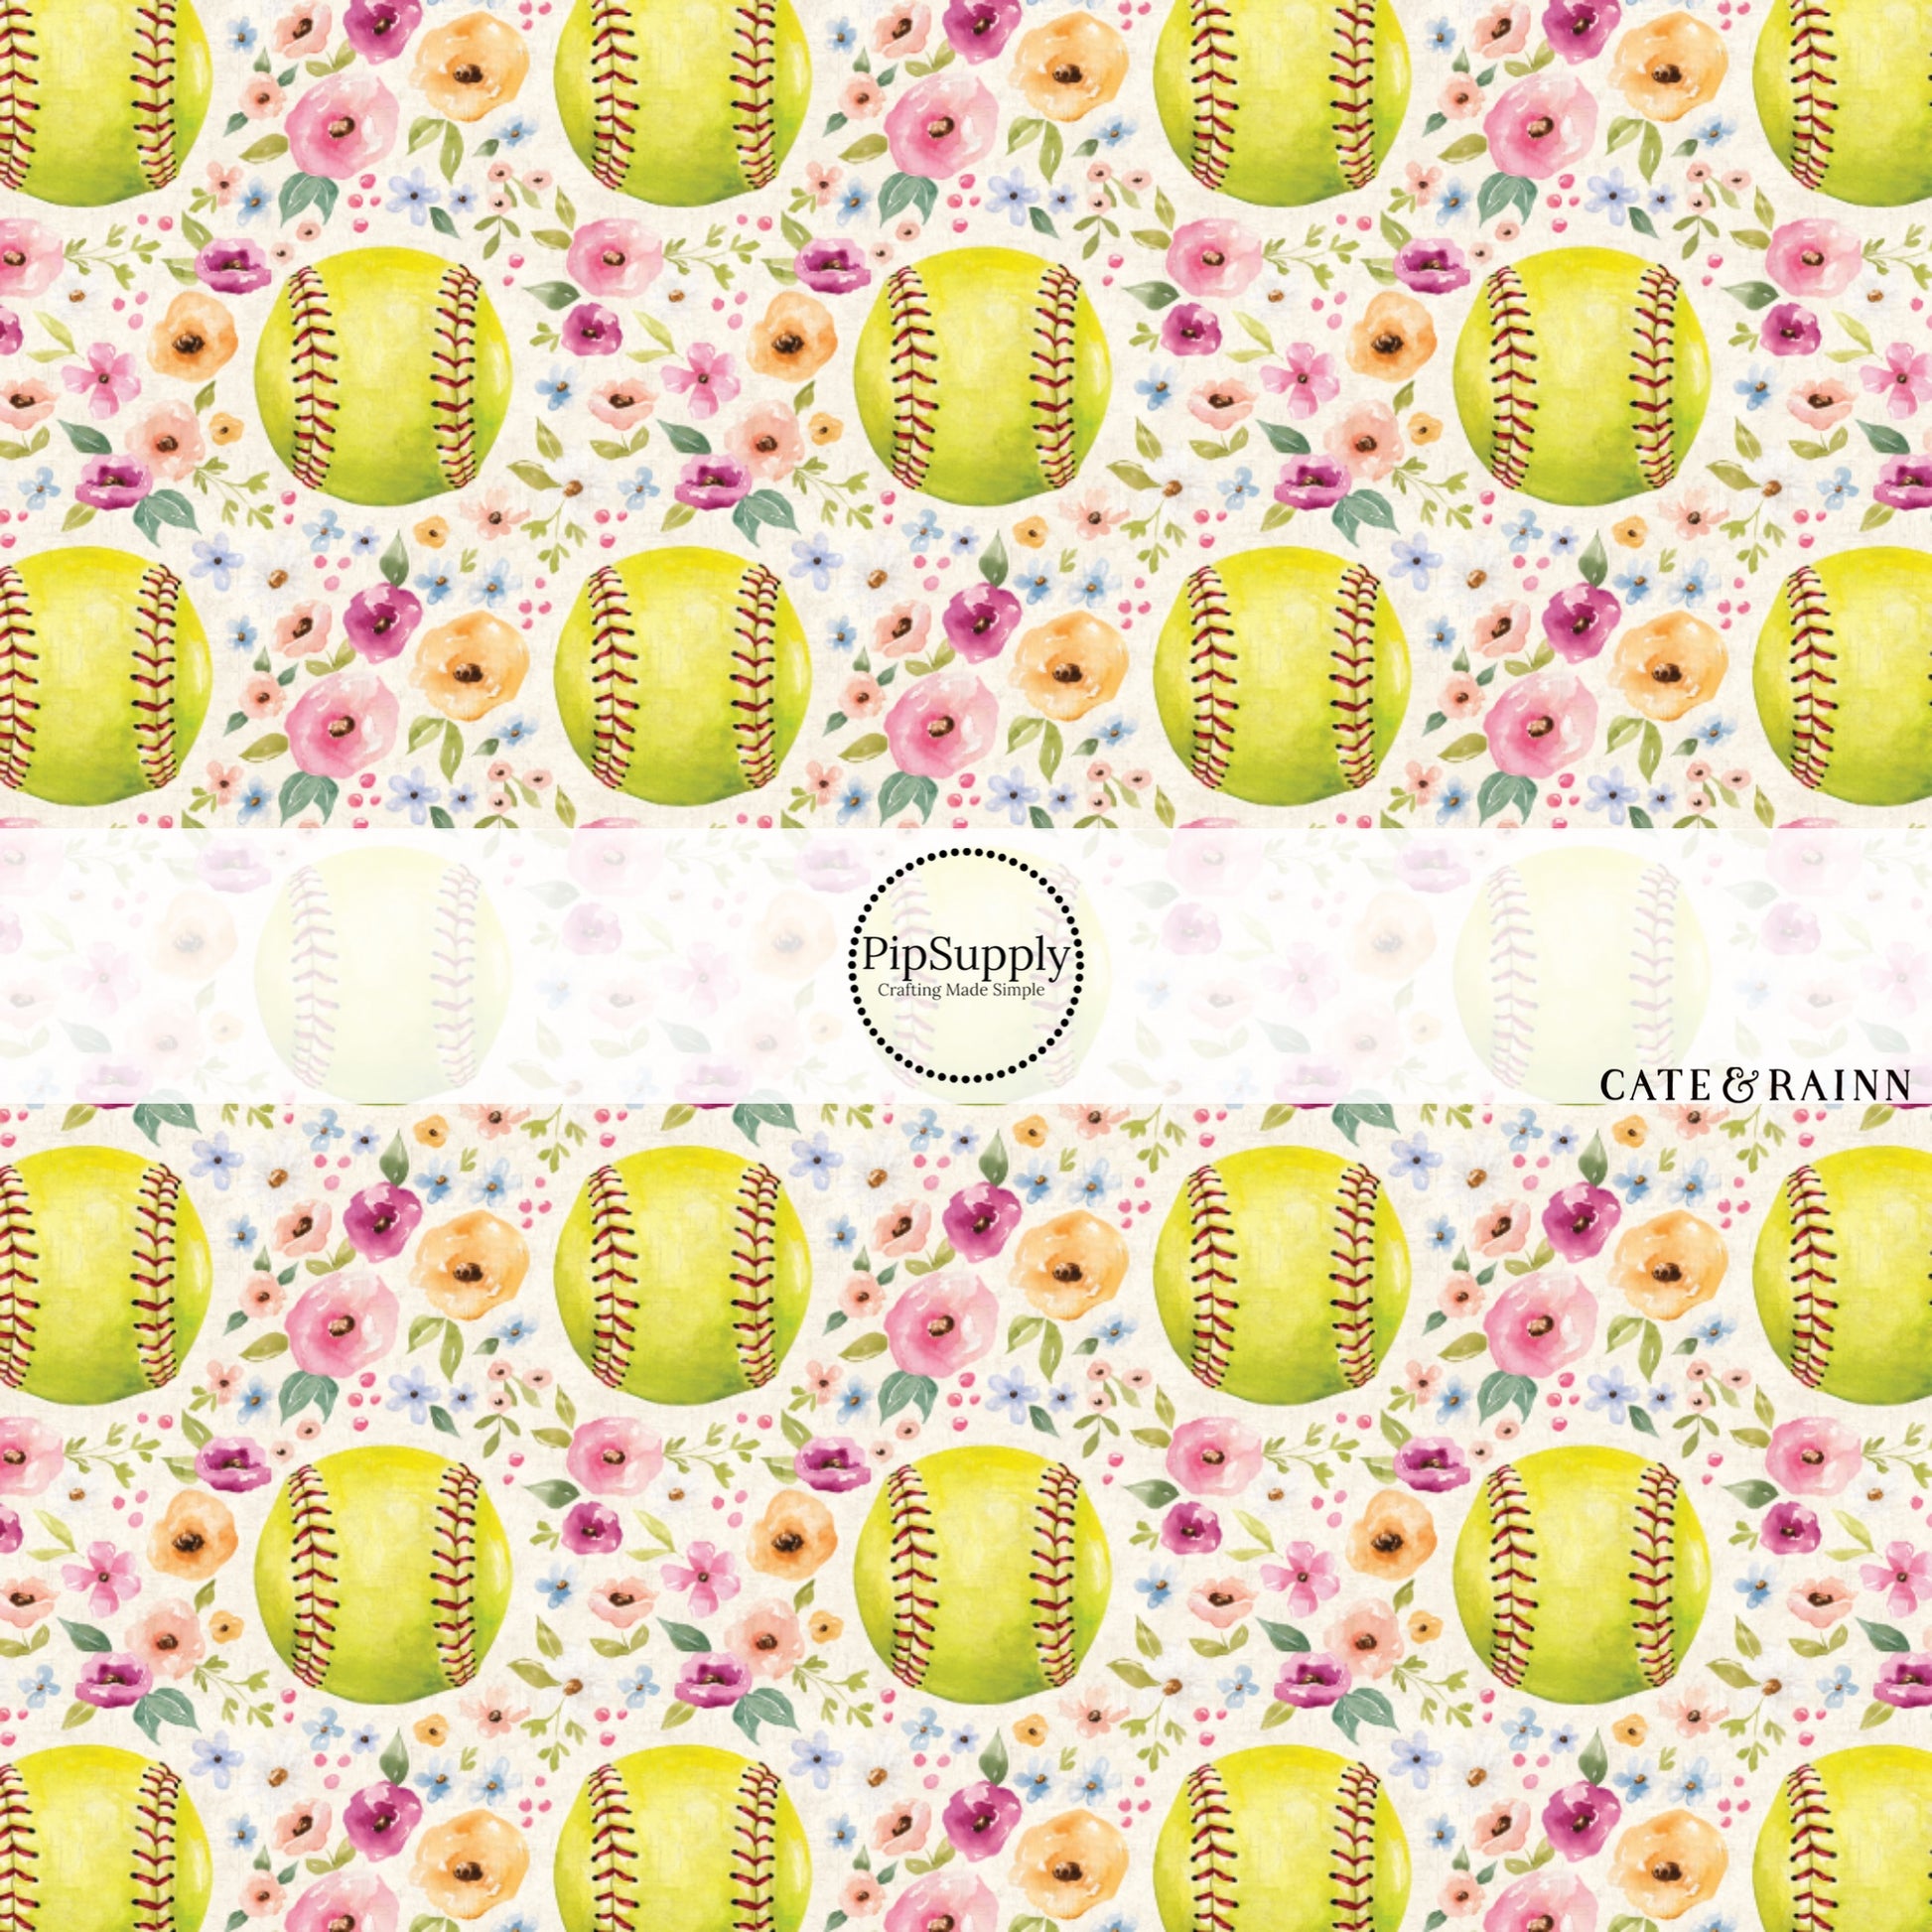 Pastel Florals and Softballs on Cream Fabric by the Yard.